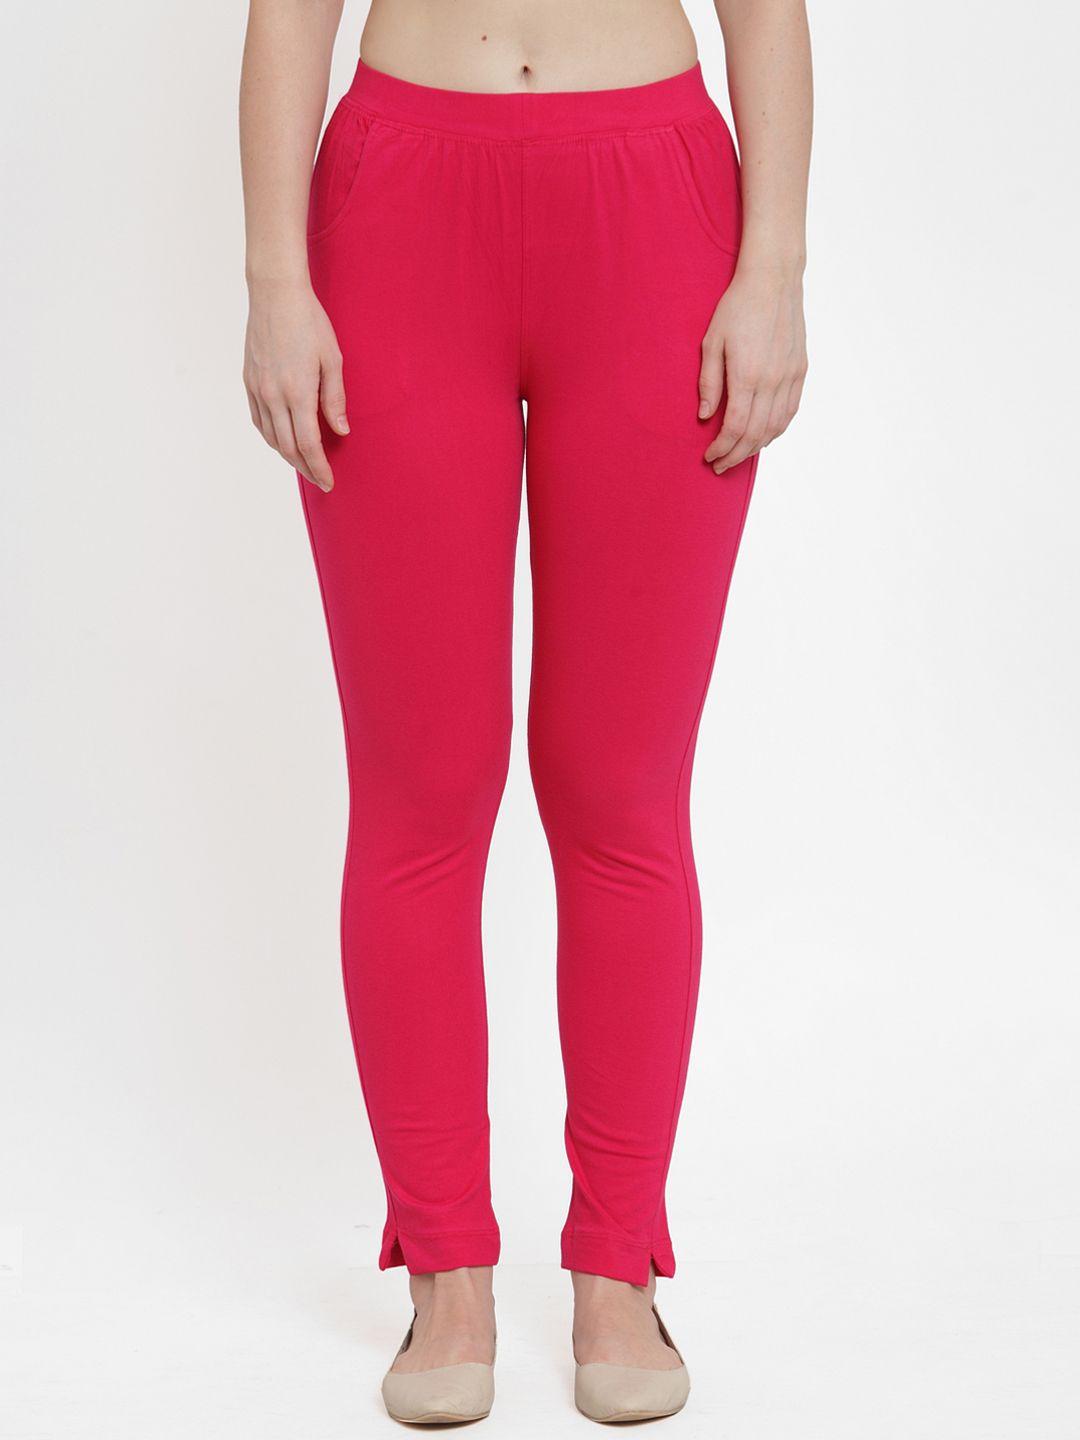 tag 7 women pink solid ankle-length leggings